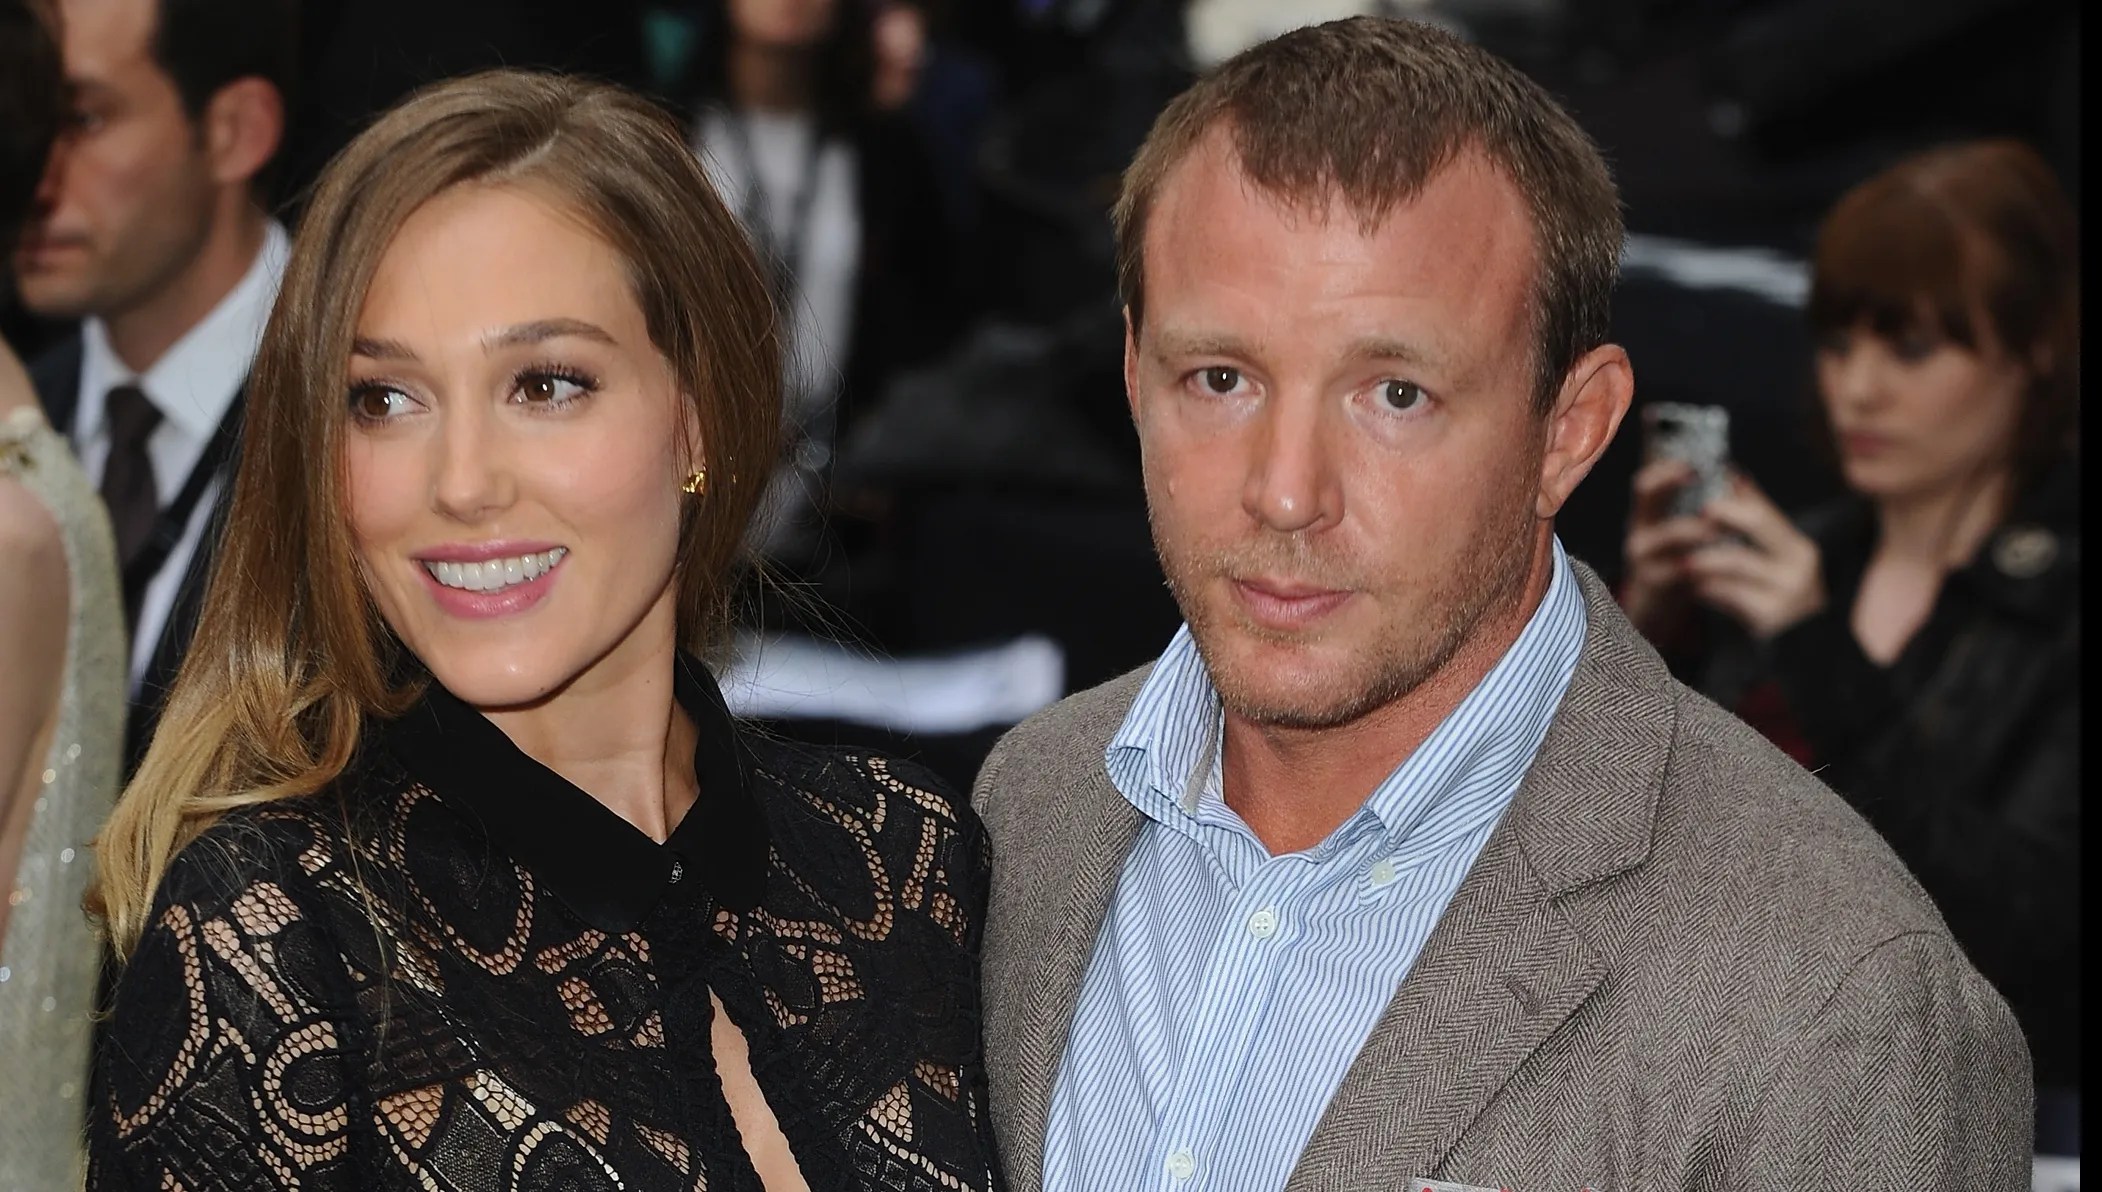 Guy Ritchie engaged to marry pregnant girlfriend